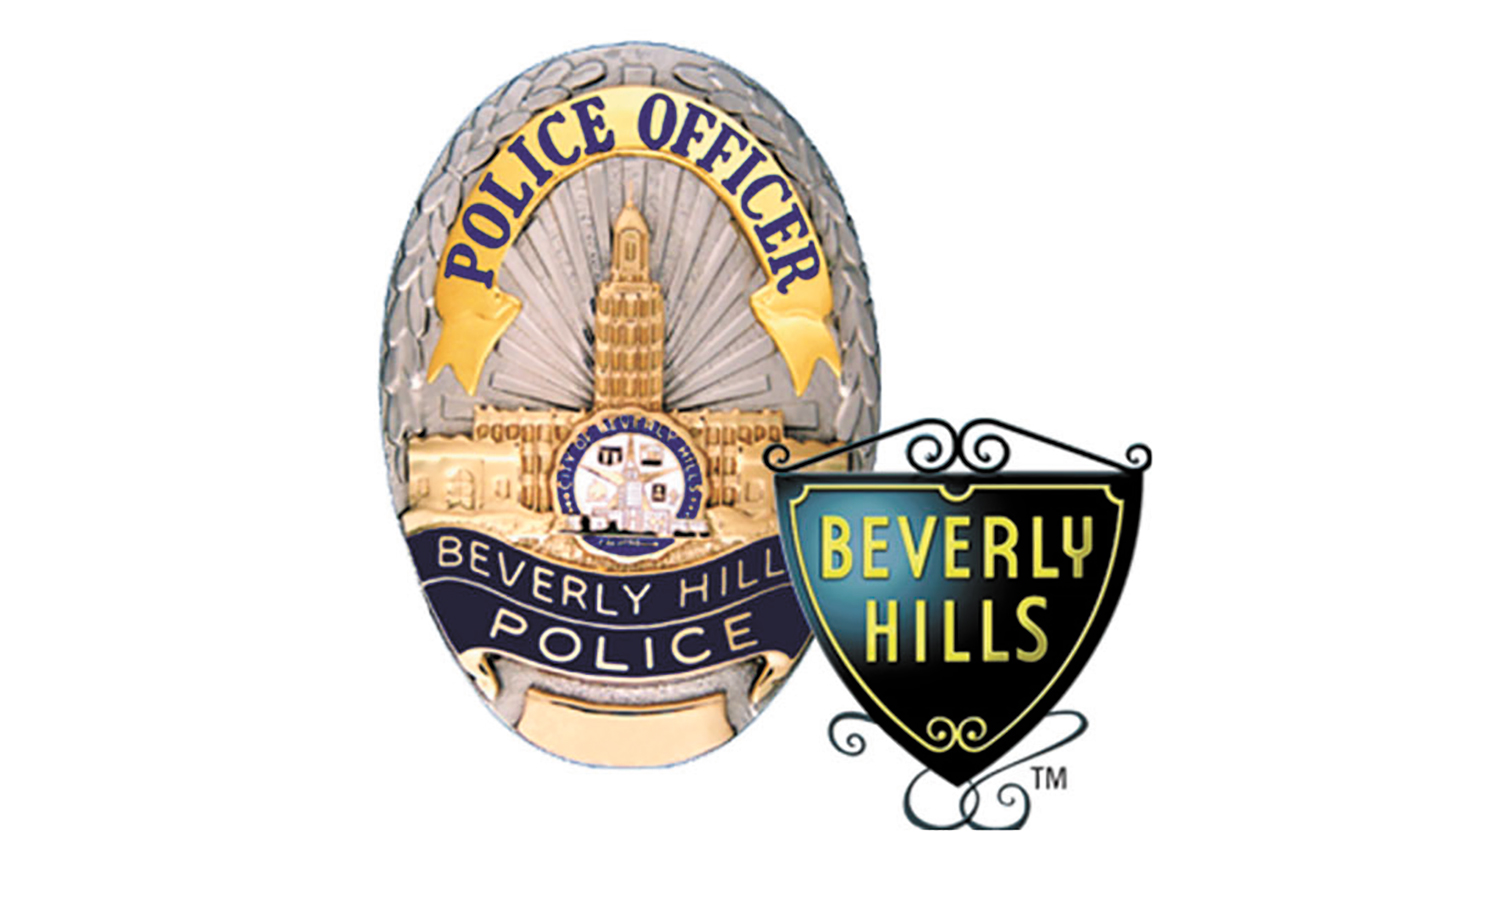 Beverly Hills Man Charged With Murder-For-Hire